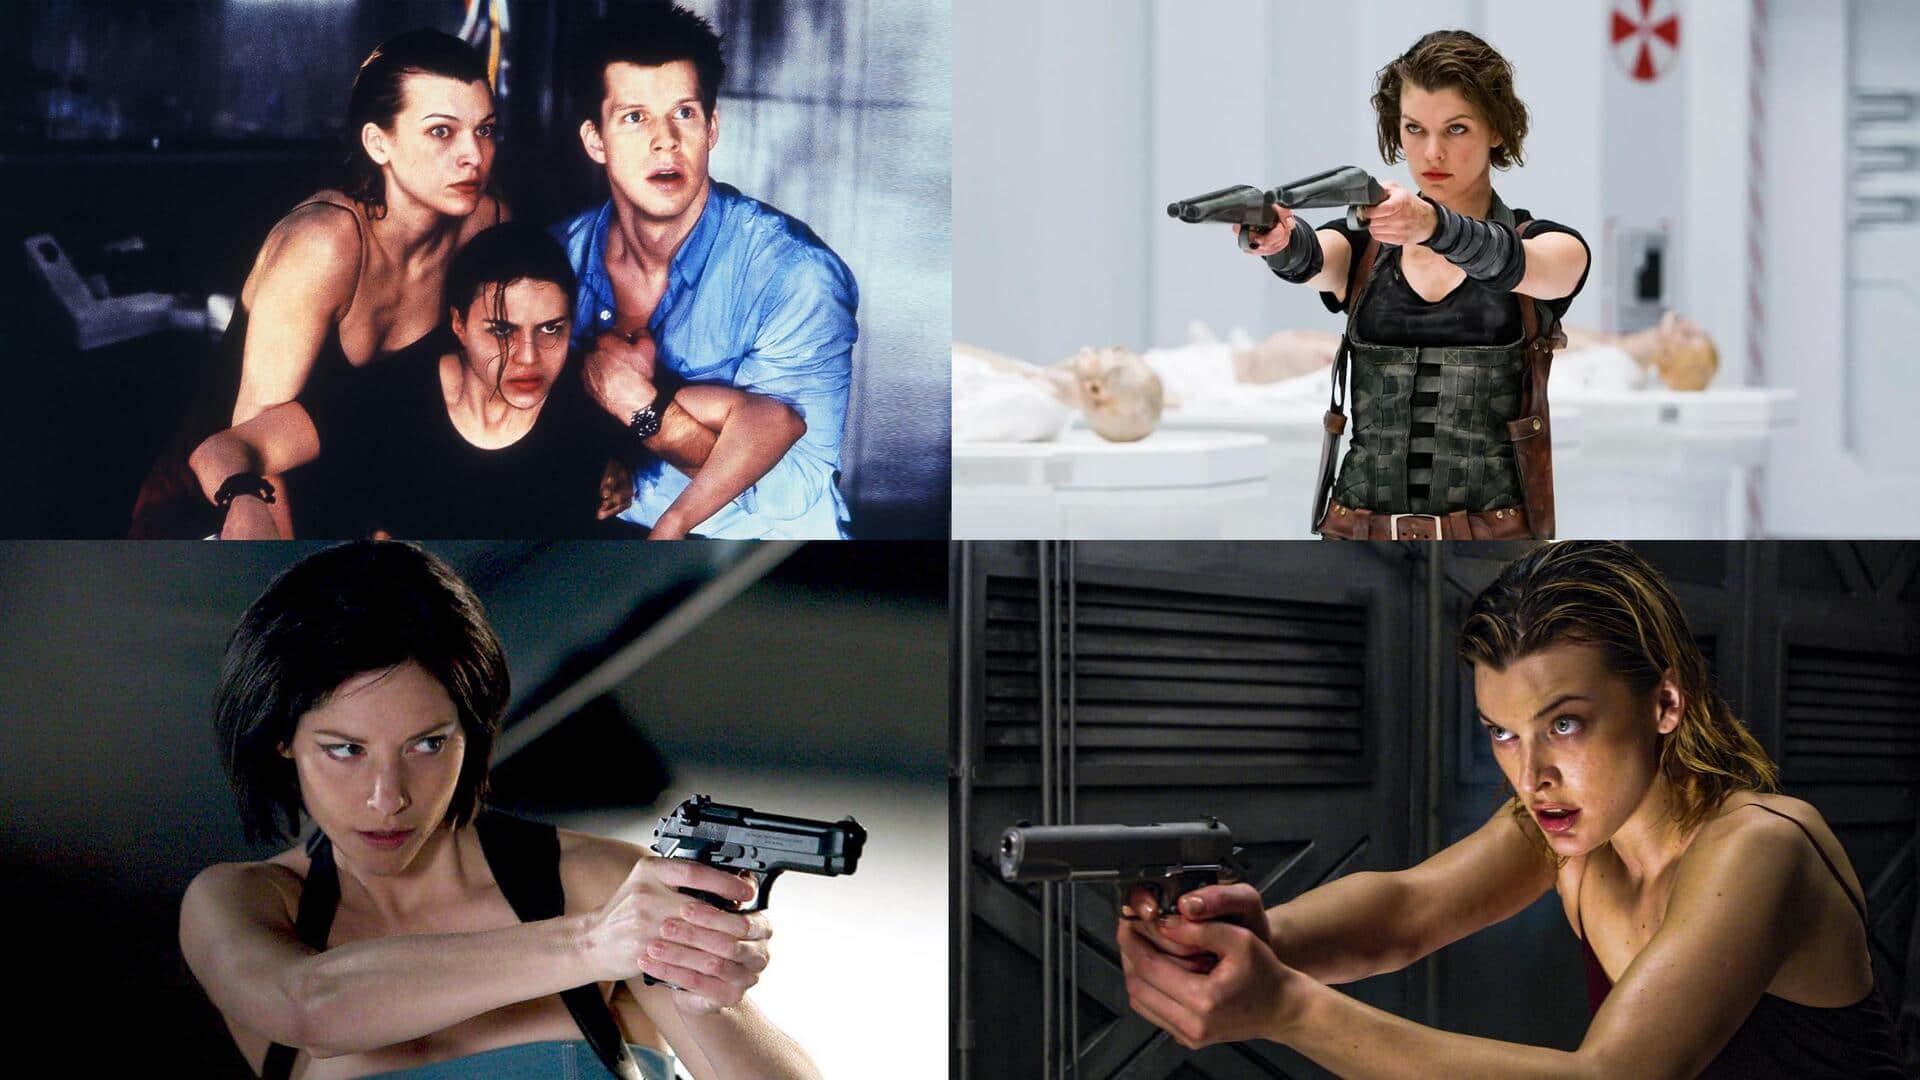 How to watch 'Resident Evil' movies in chronological order